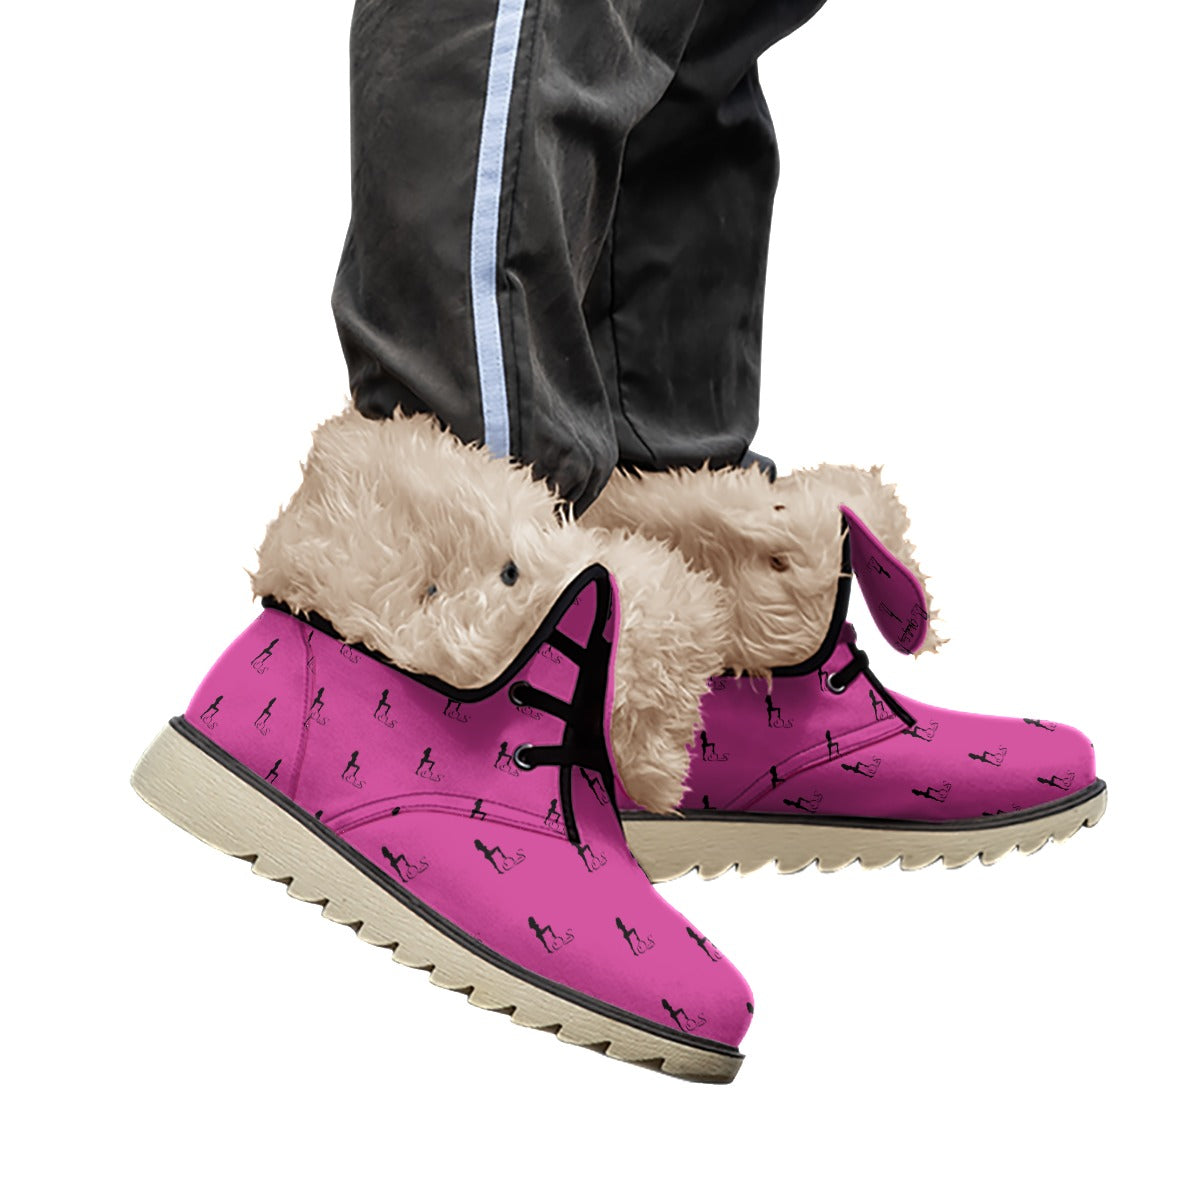 Officially Sexy Pink Laser Collection Women's Plush Boots